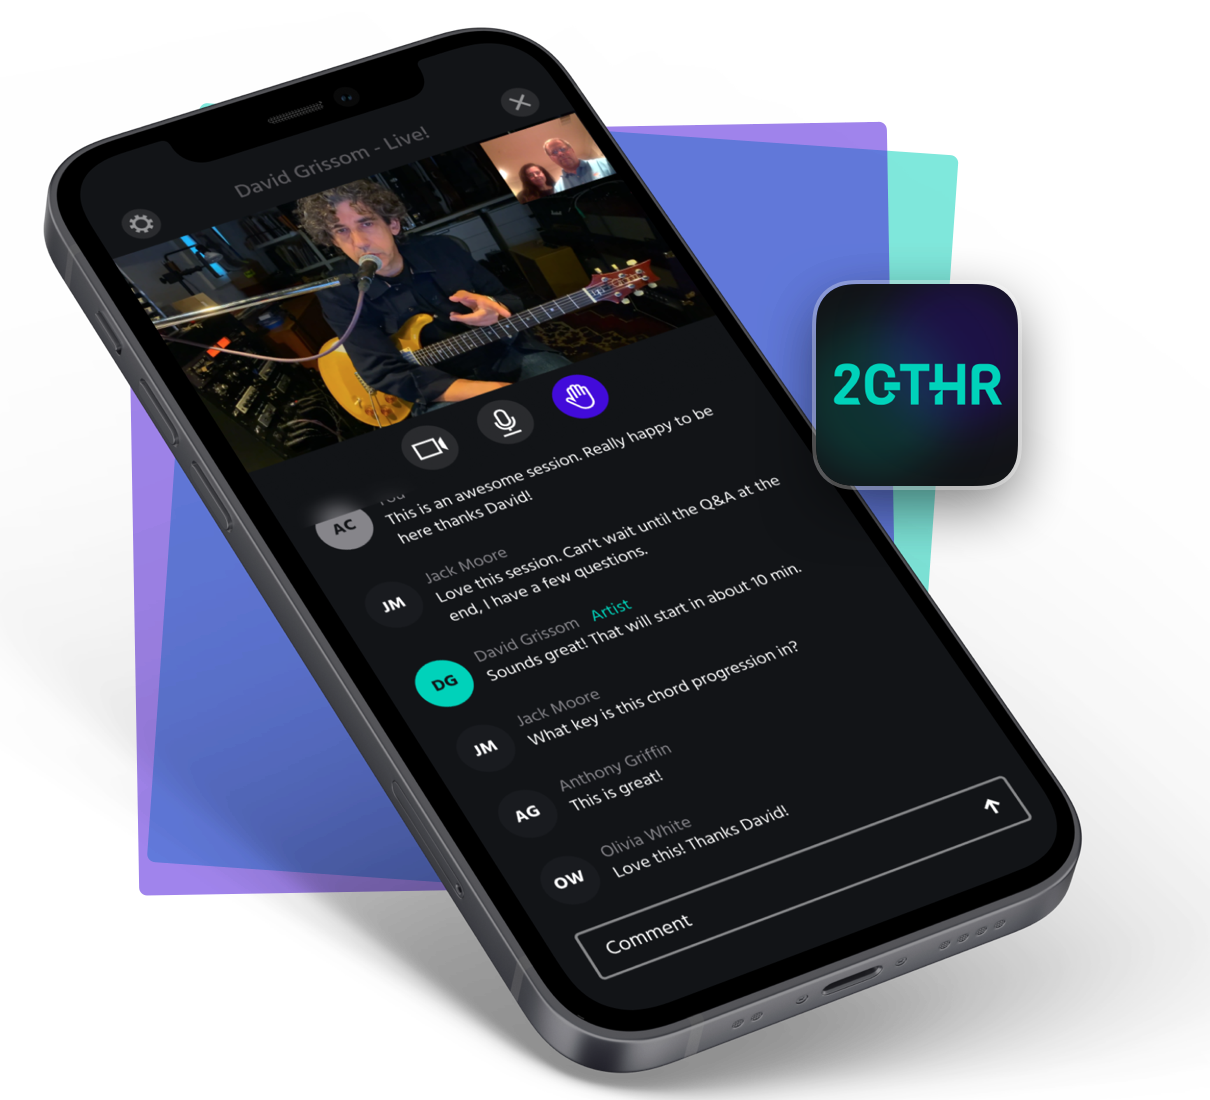 2GTHR’s mission is to connect live audiences with the artists they love